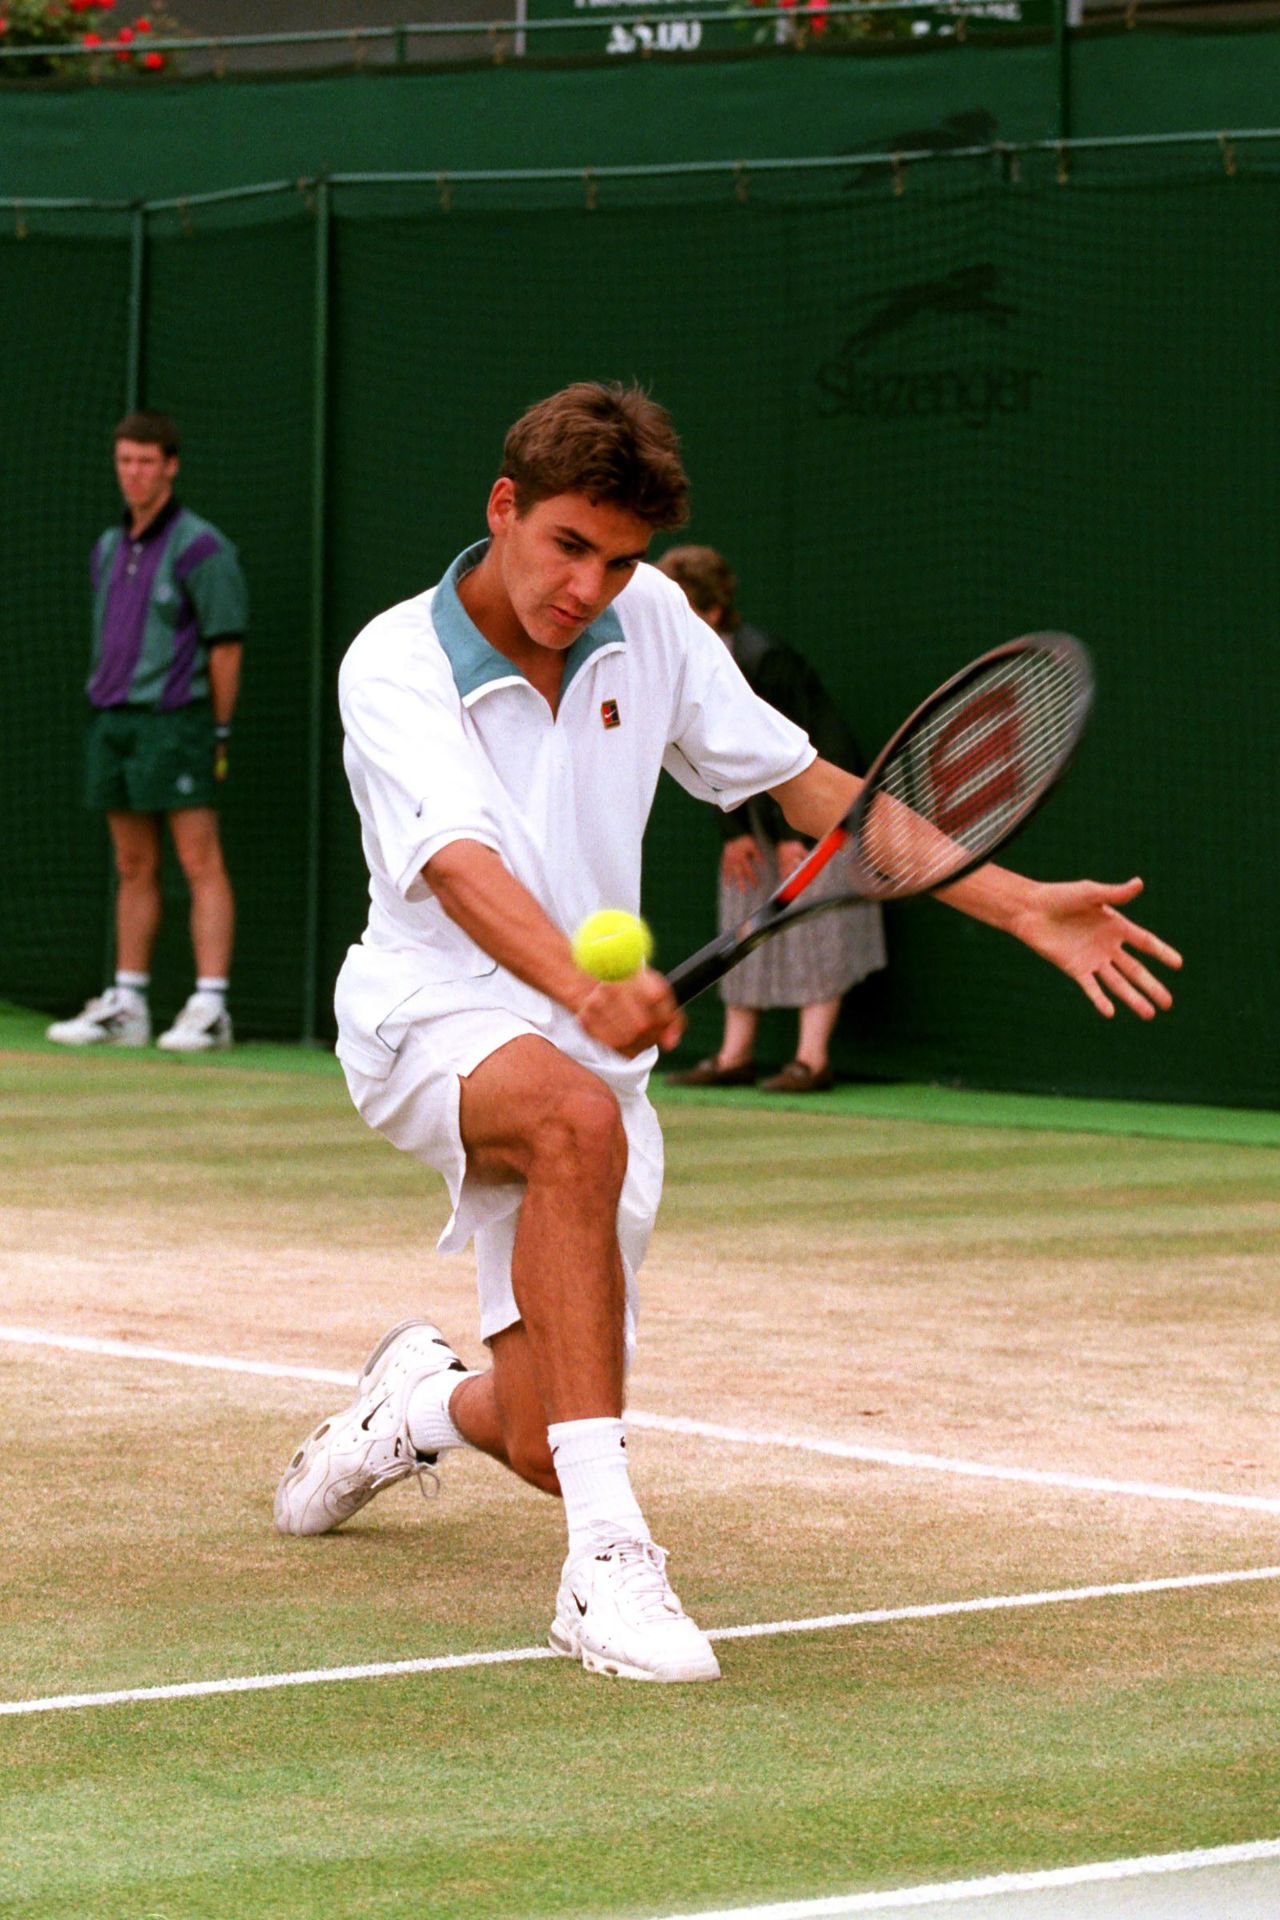 A teenage Federer hits a shot while on his way to winning the junior title at Wimbledon in 1998.